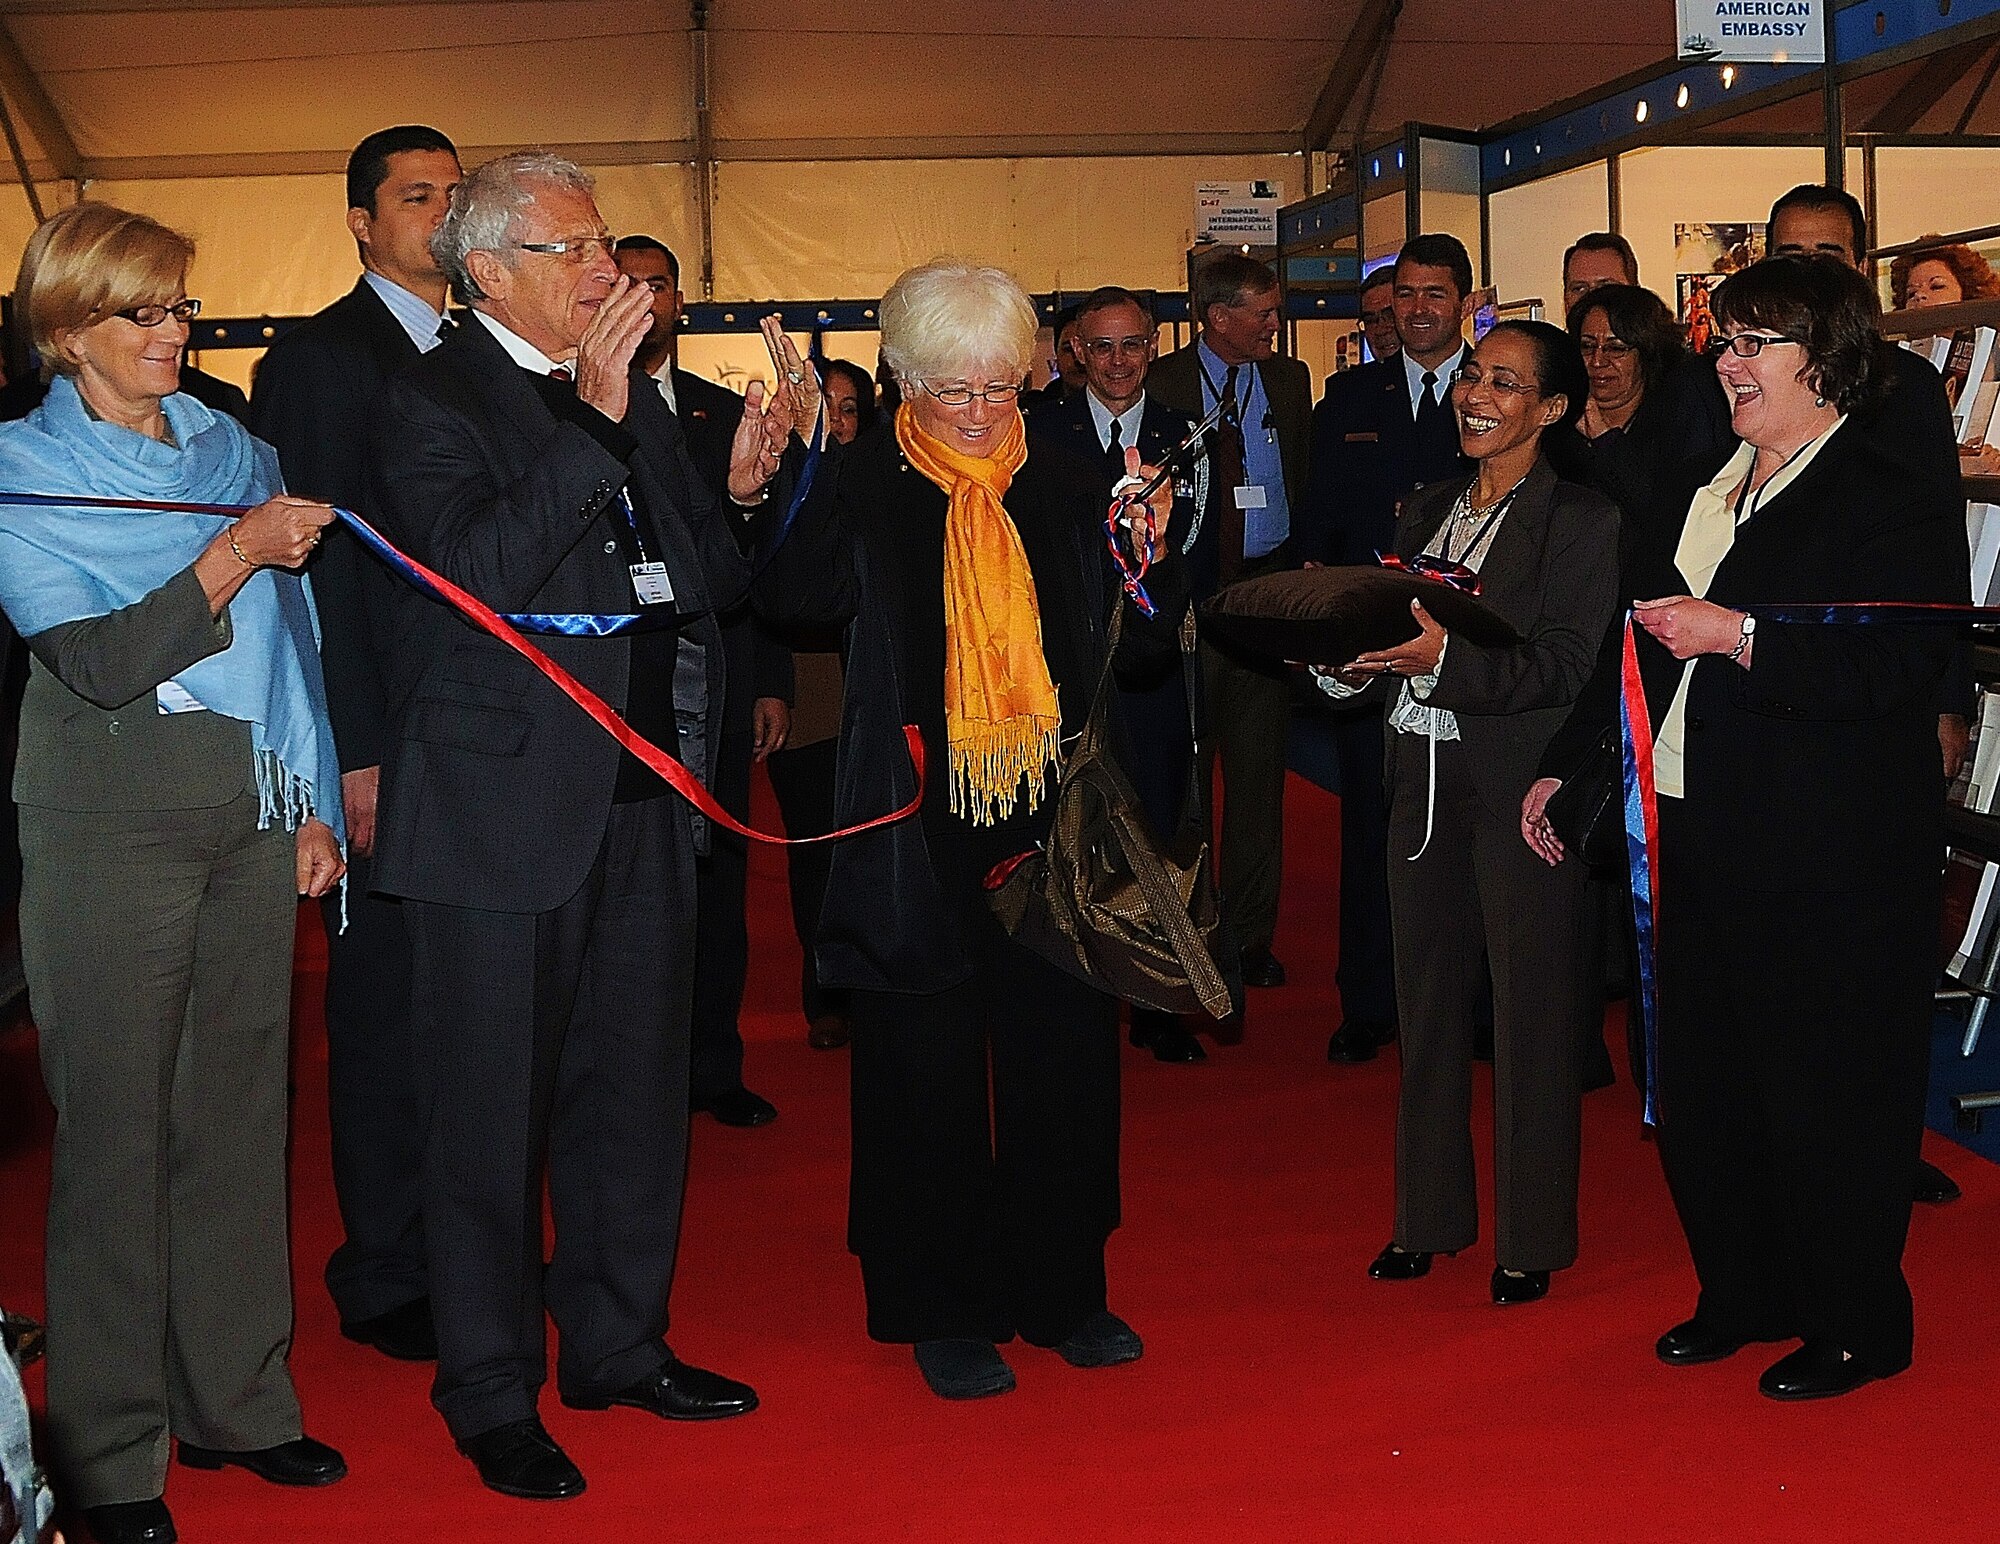 MARRAKECH, Morocco -- Mrs. Silvia Kaplain, wife of the U.S. Ambassador to Morocco, Mr. Sam. Kaplan, cuts the ribbon to the opening of the U.S. Embassy pavilion Jan. 27 at the Marrakech Aeroexpo 2010. The pavilion holds all of the U.S. industry displays including a U.S. Embassy section. The purpose of the Aeroexpo is to build on relationships and to bring major players in the aeronautics industry to showcase their aviation technology. (U.S. Air Force photo by Staff Sgt. Stefanie Torres)